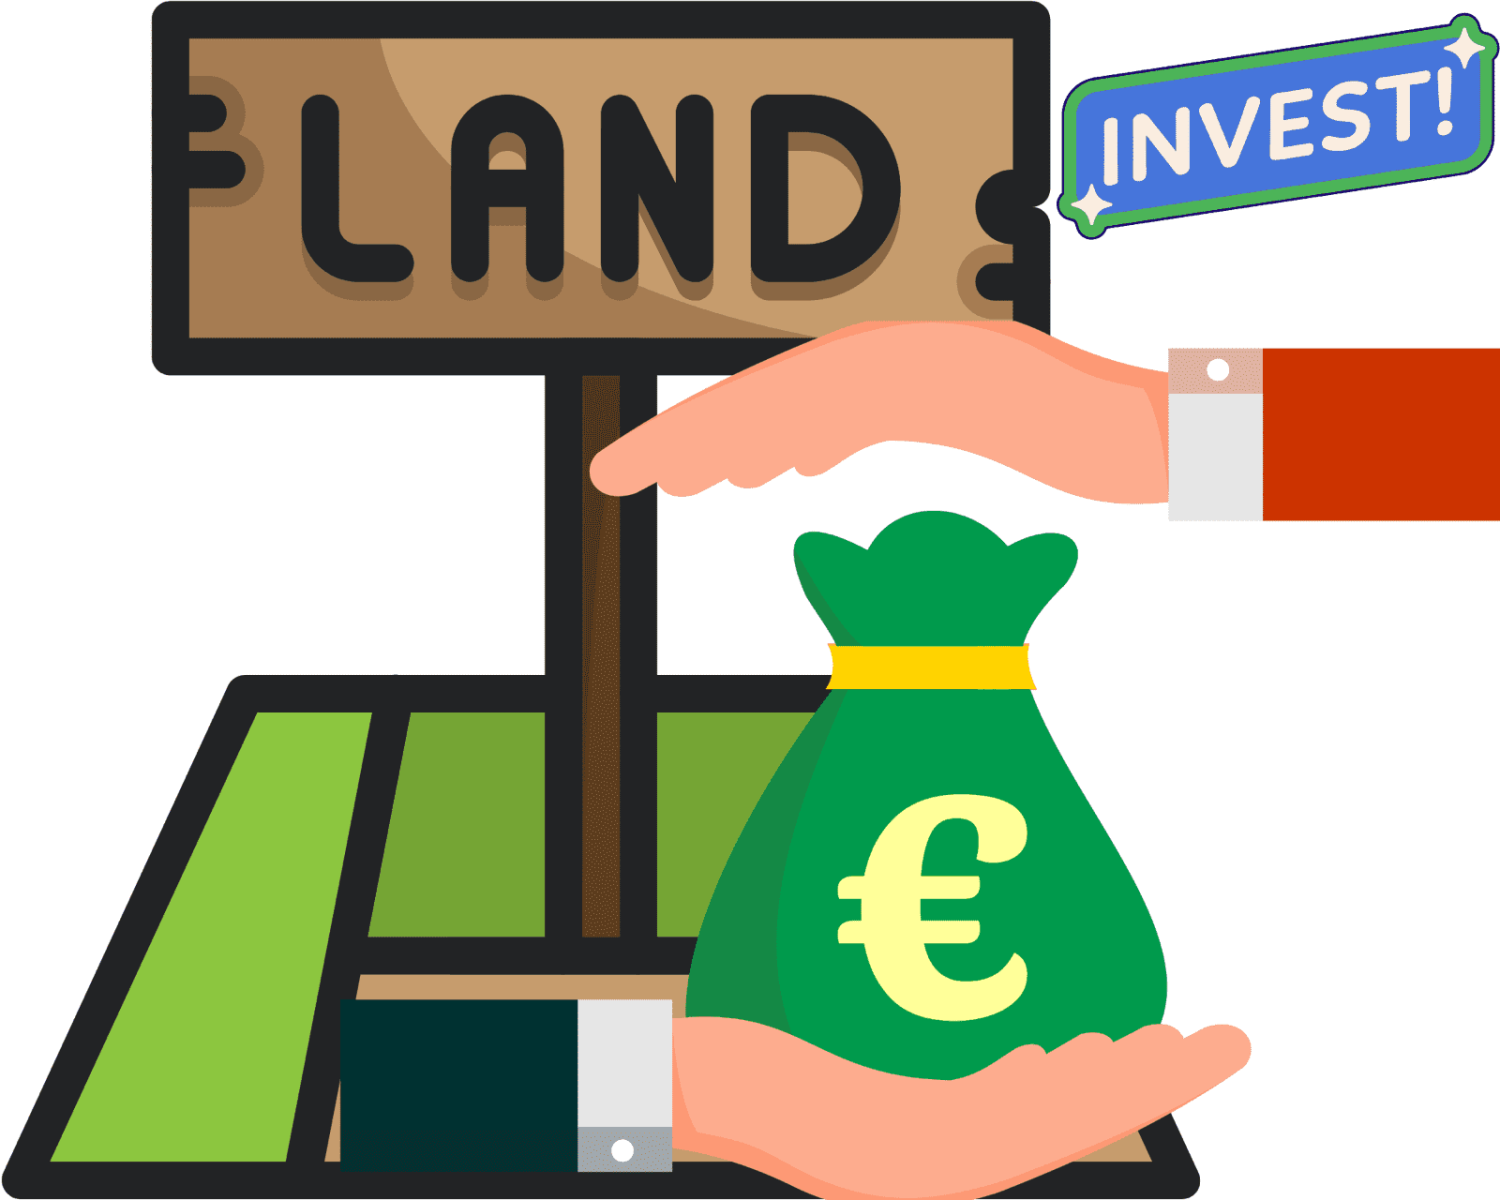 How to Invest in Land Without Money?